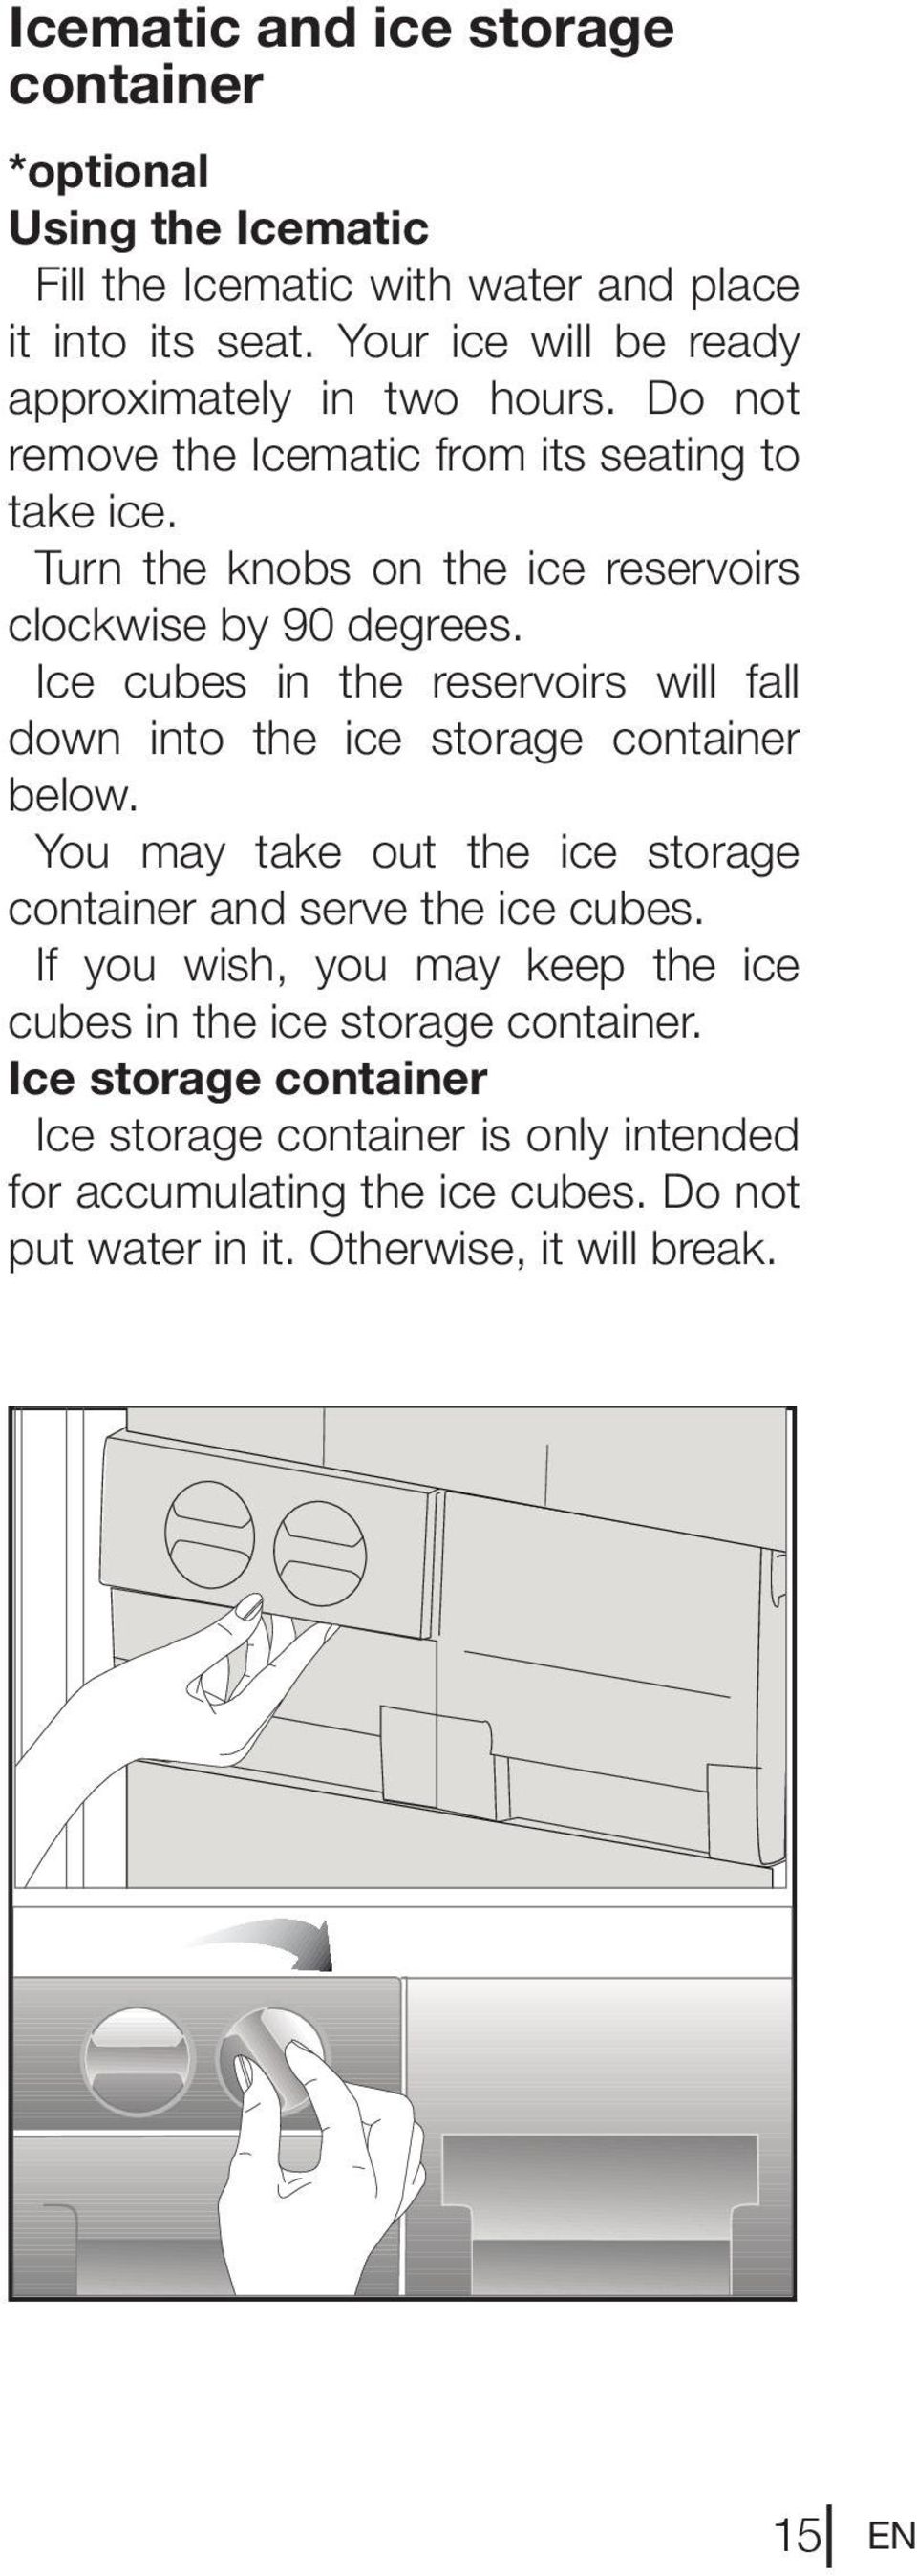 Turn the knobs on the ice reservoirs clockwise by 90 degrees. Ice cubes in the reservoirs will fall down into the ice storage container below.